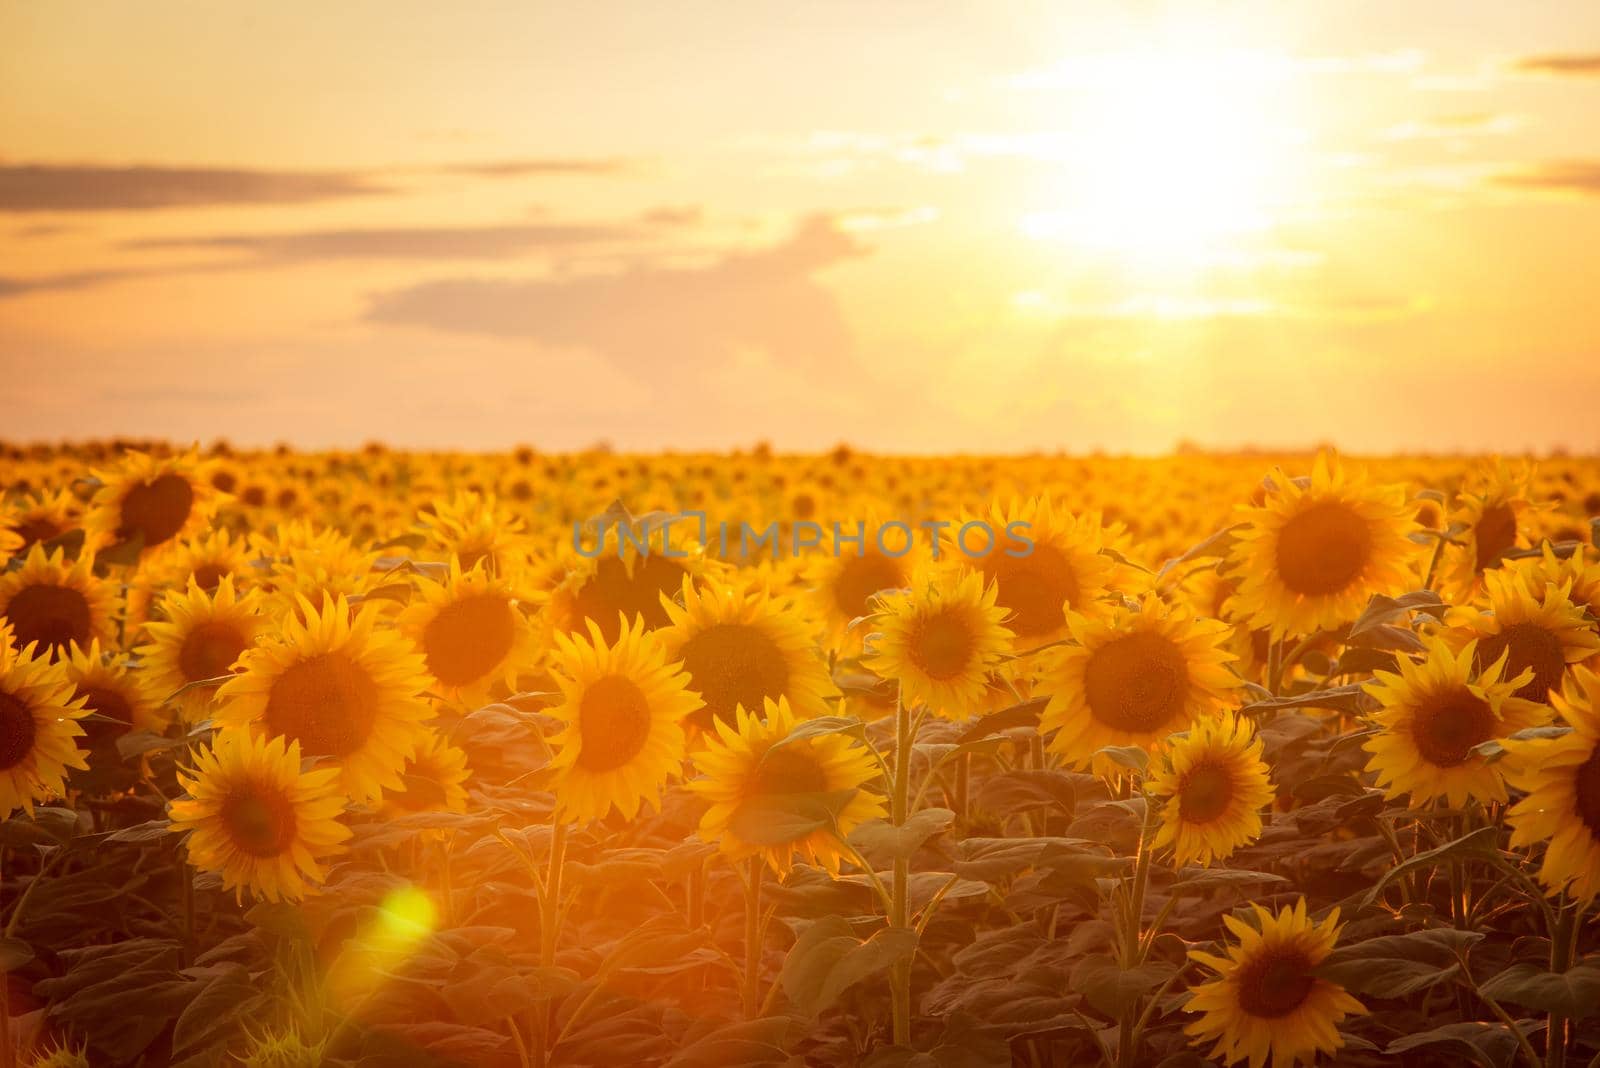 Toned photo of golden sunflowers against bright sun setting to the clouds in horizon